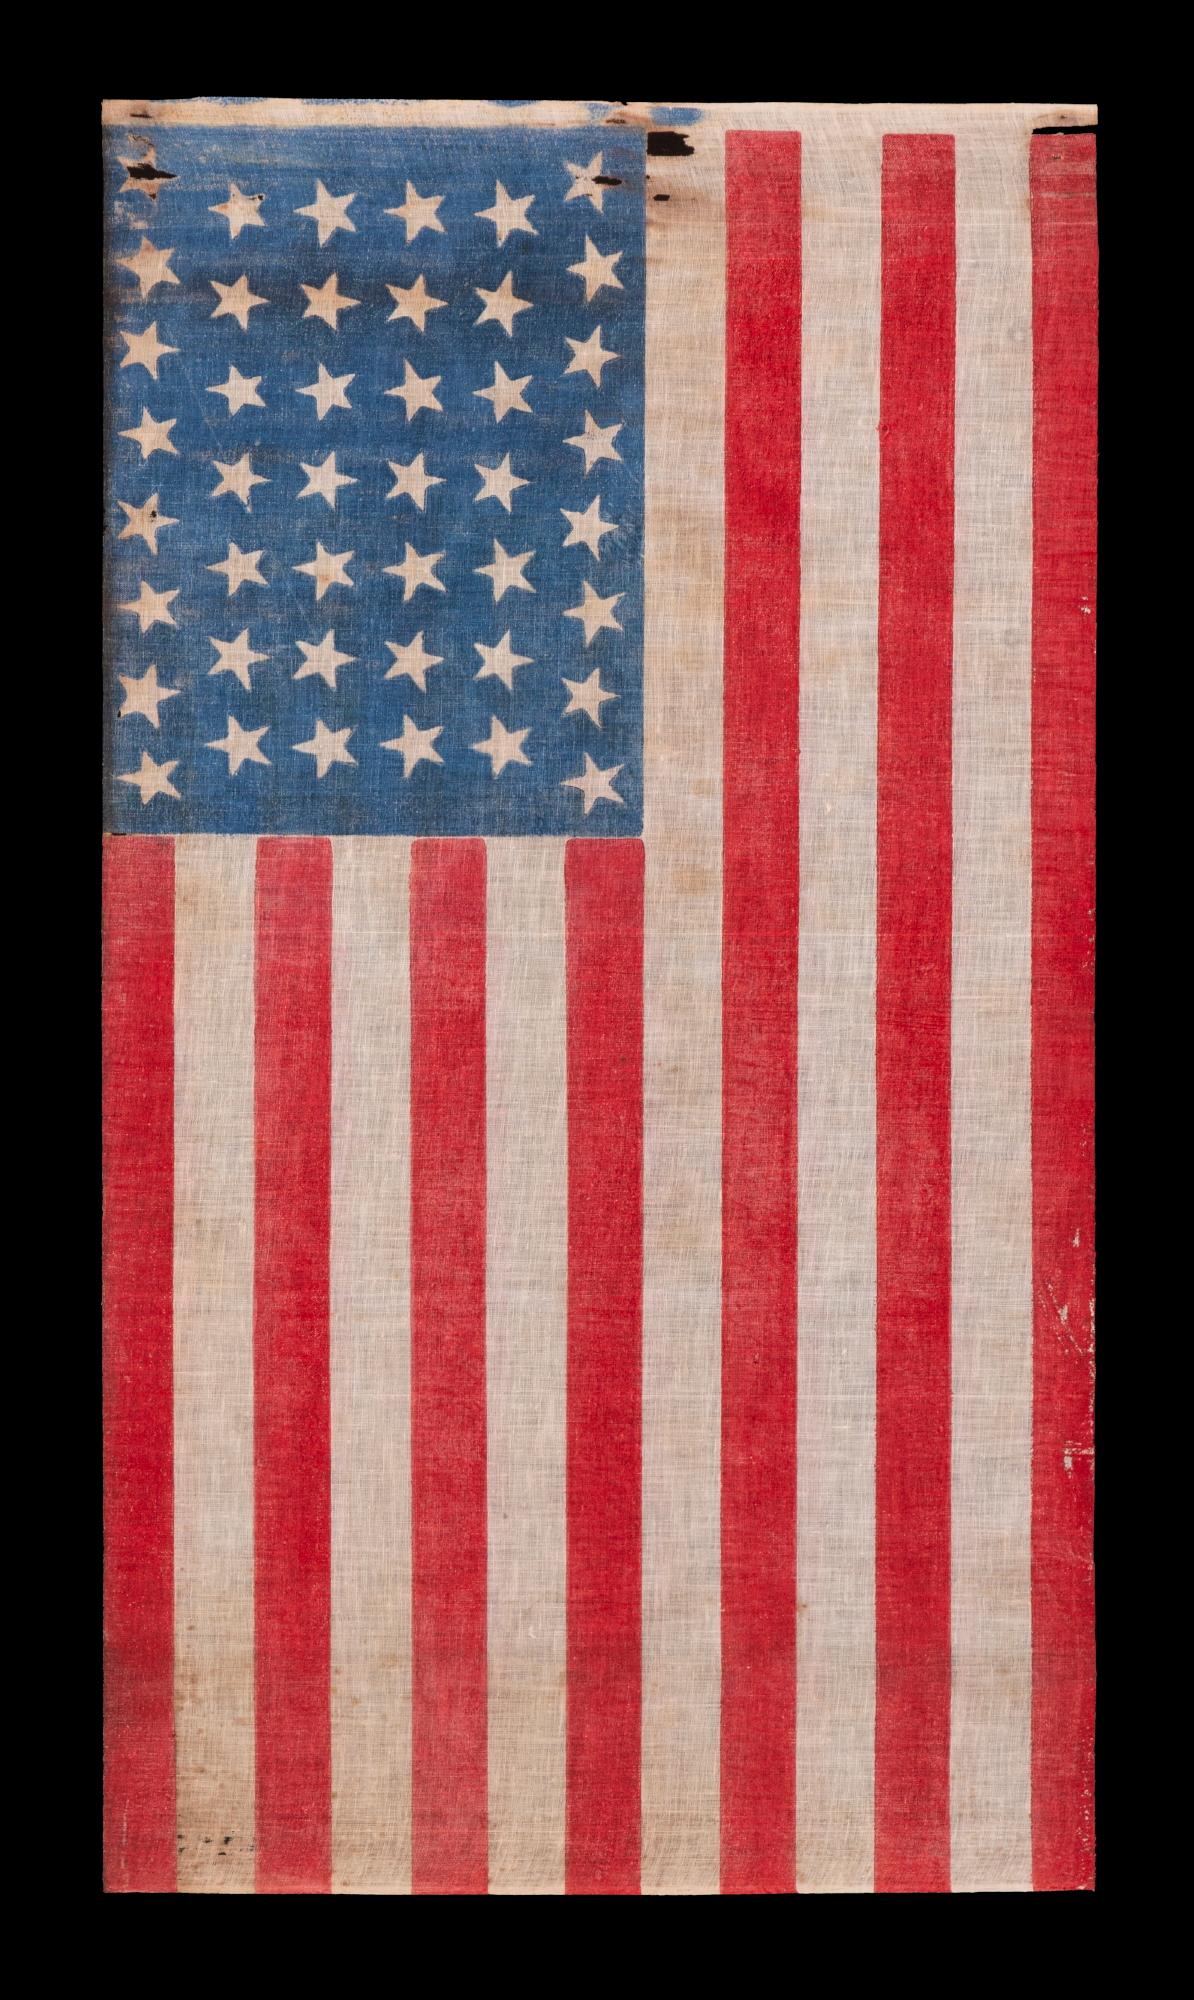 44 tumbling stars in an hourglass pattern, on an antique American flag with a striking, bright blue canton and scarlet stripes, reflects wyoming statehood, circa 1890-1896

44 star American parade flag, printed on coarse, glazed cotton. Wyoming